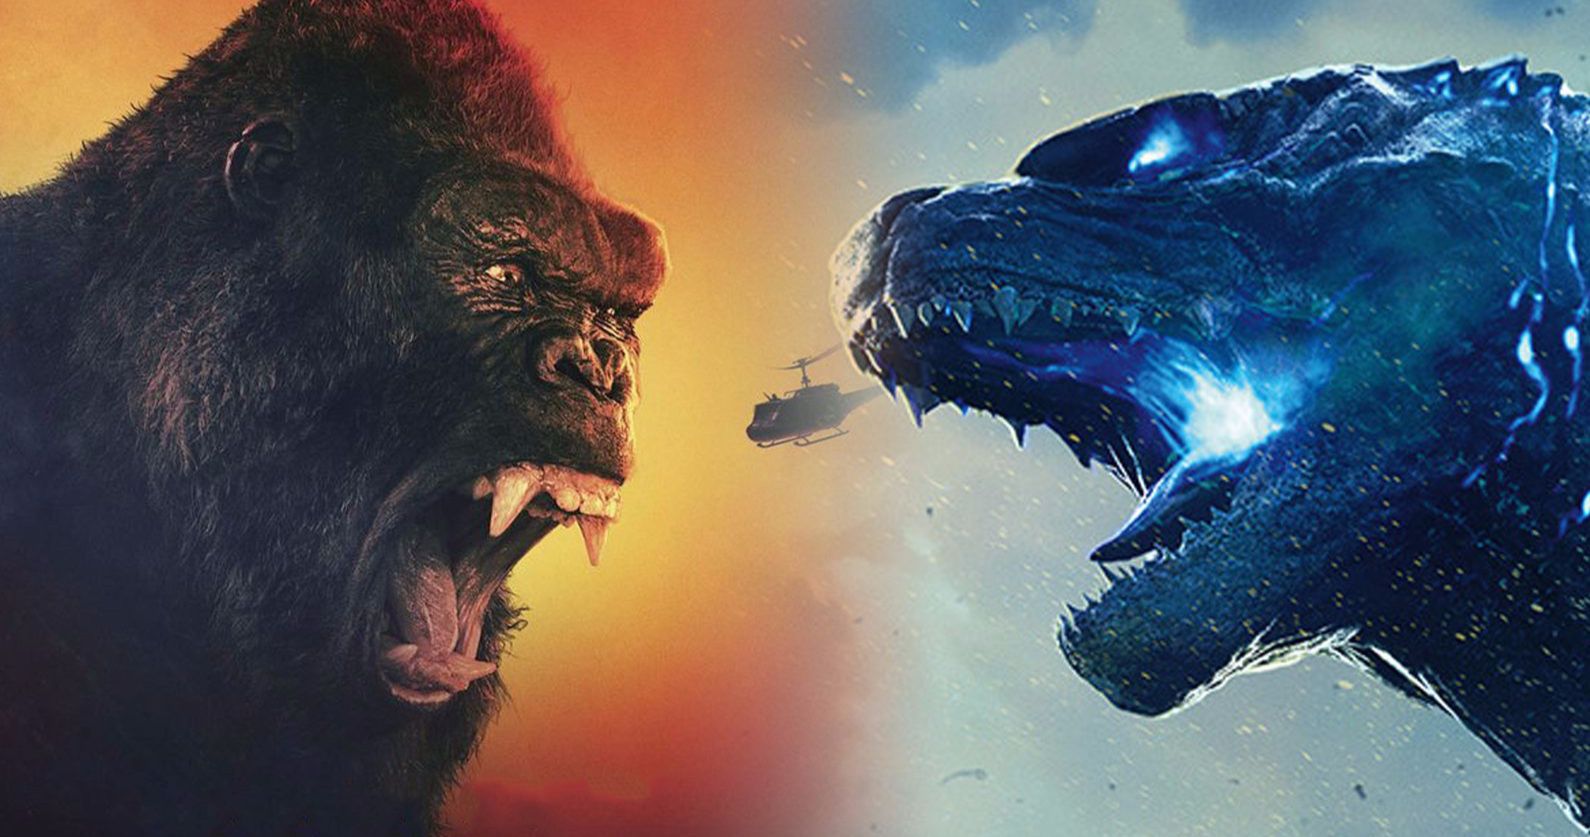 Godzilla Vs. Kong Toy Reveals New Monster That Could Destroy the World